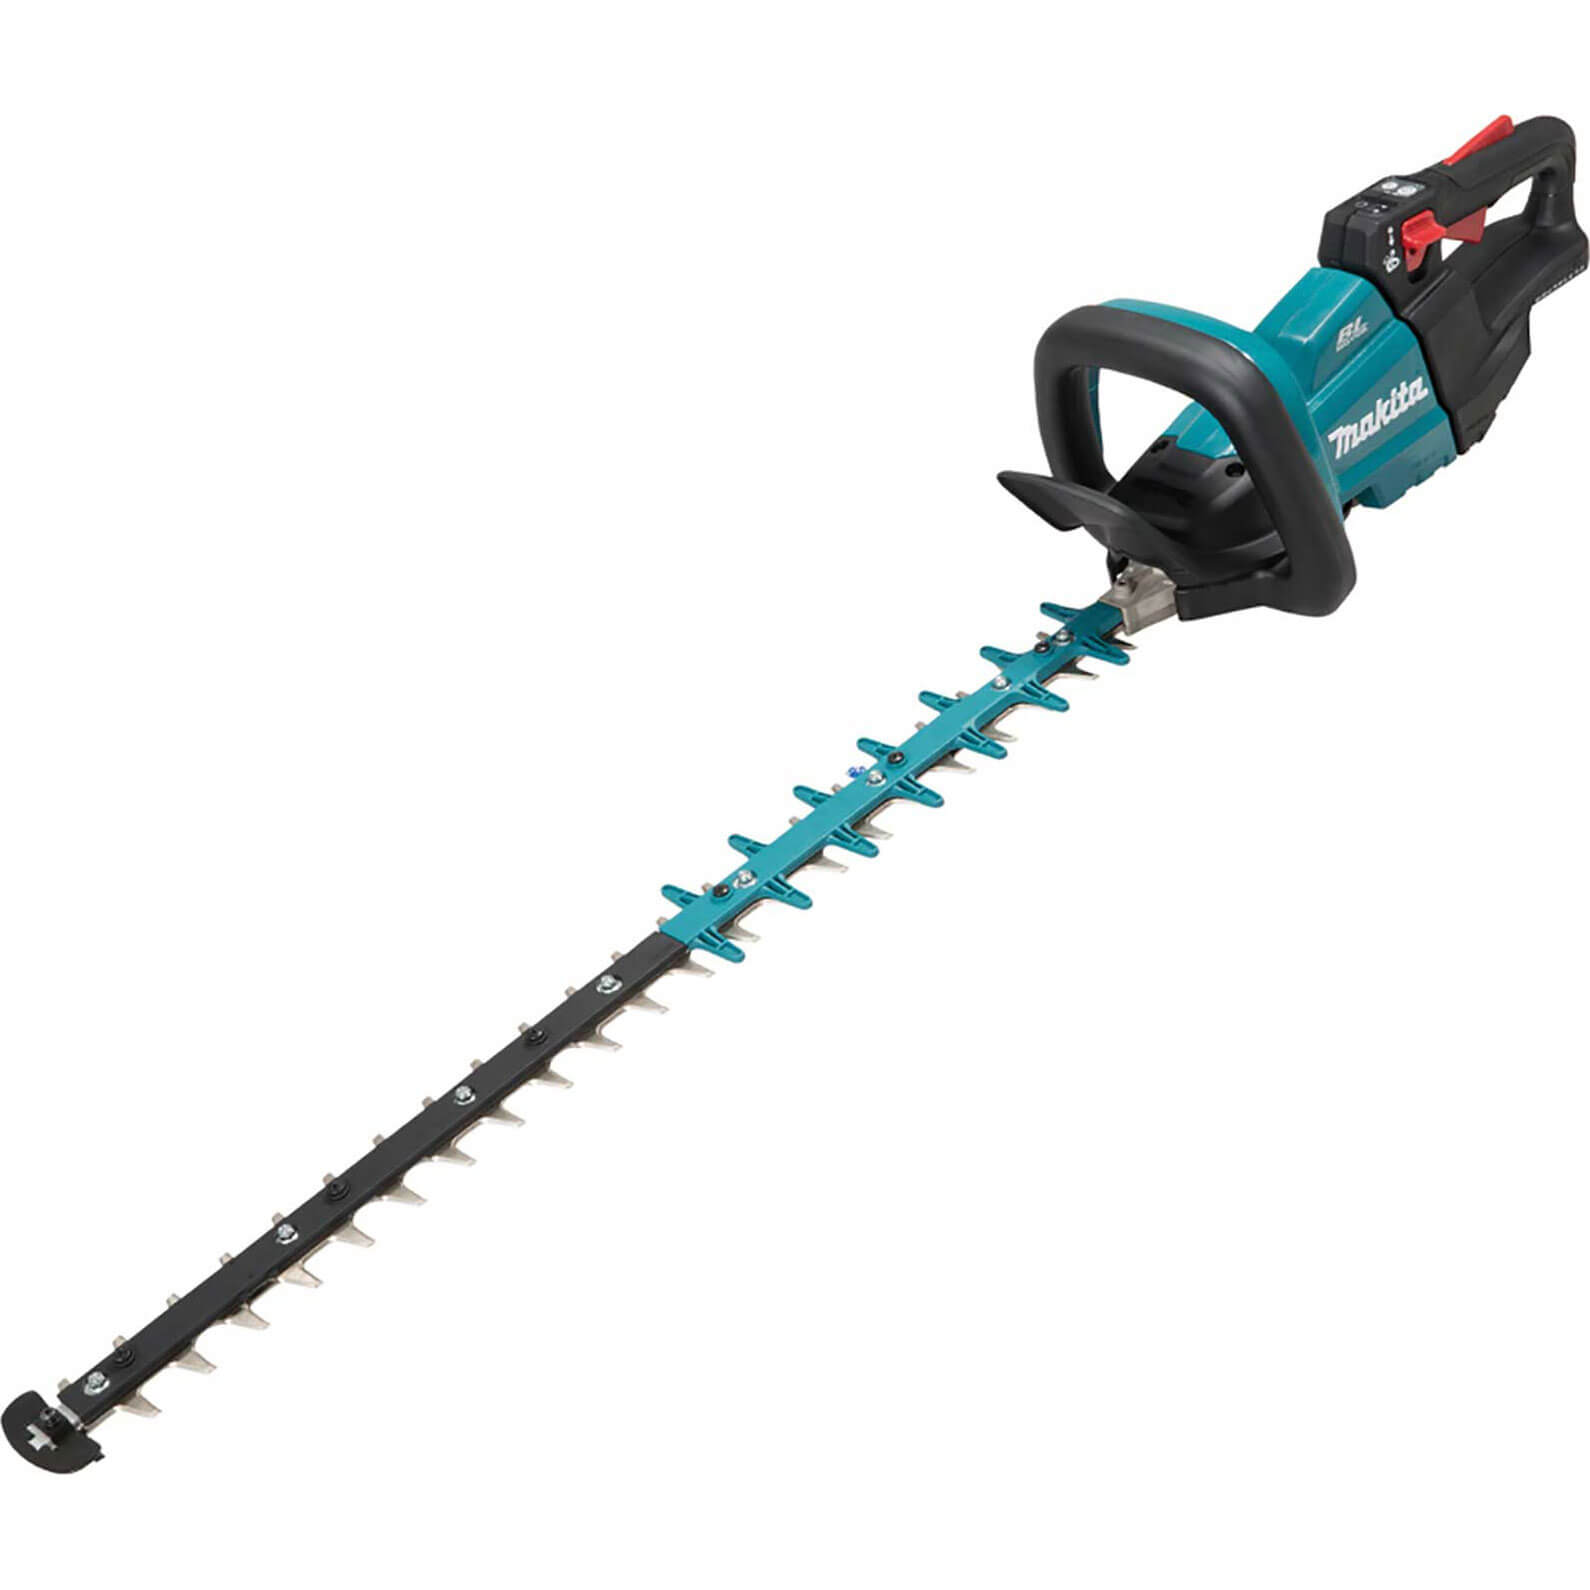 Makita DUH751 18v LXT Cordless Brushless Hedge Trimmer 750mm No Batteries No Charger